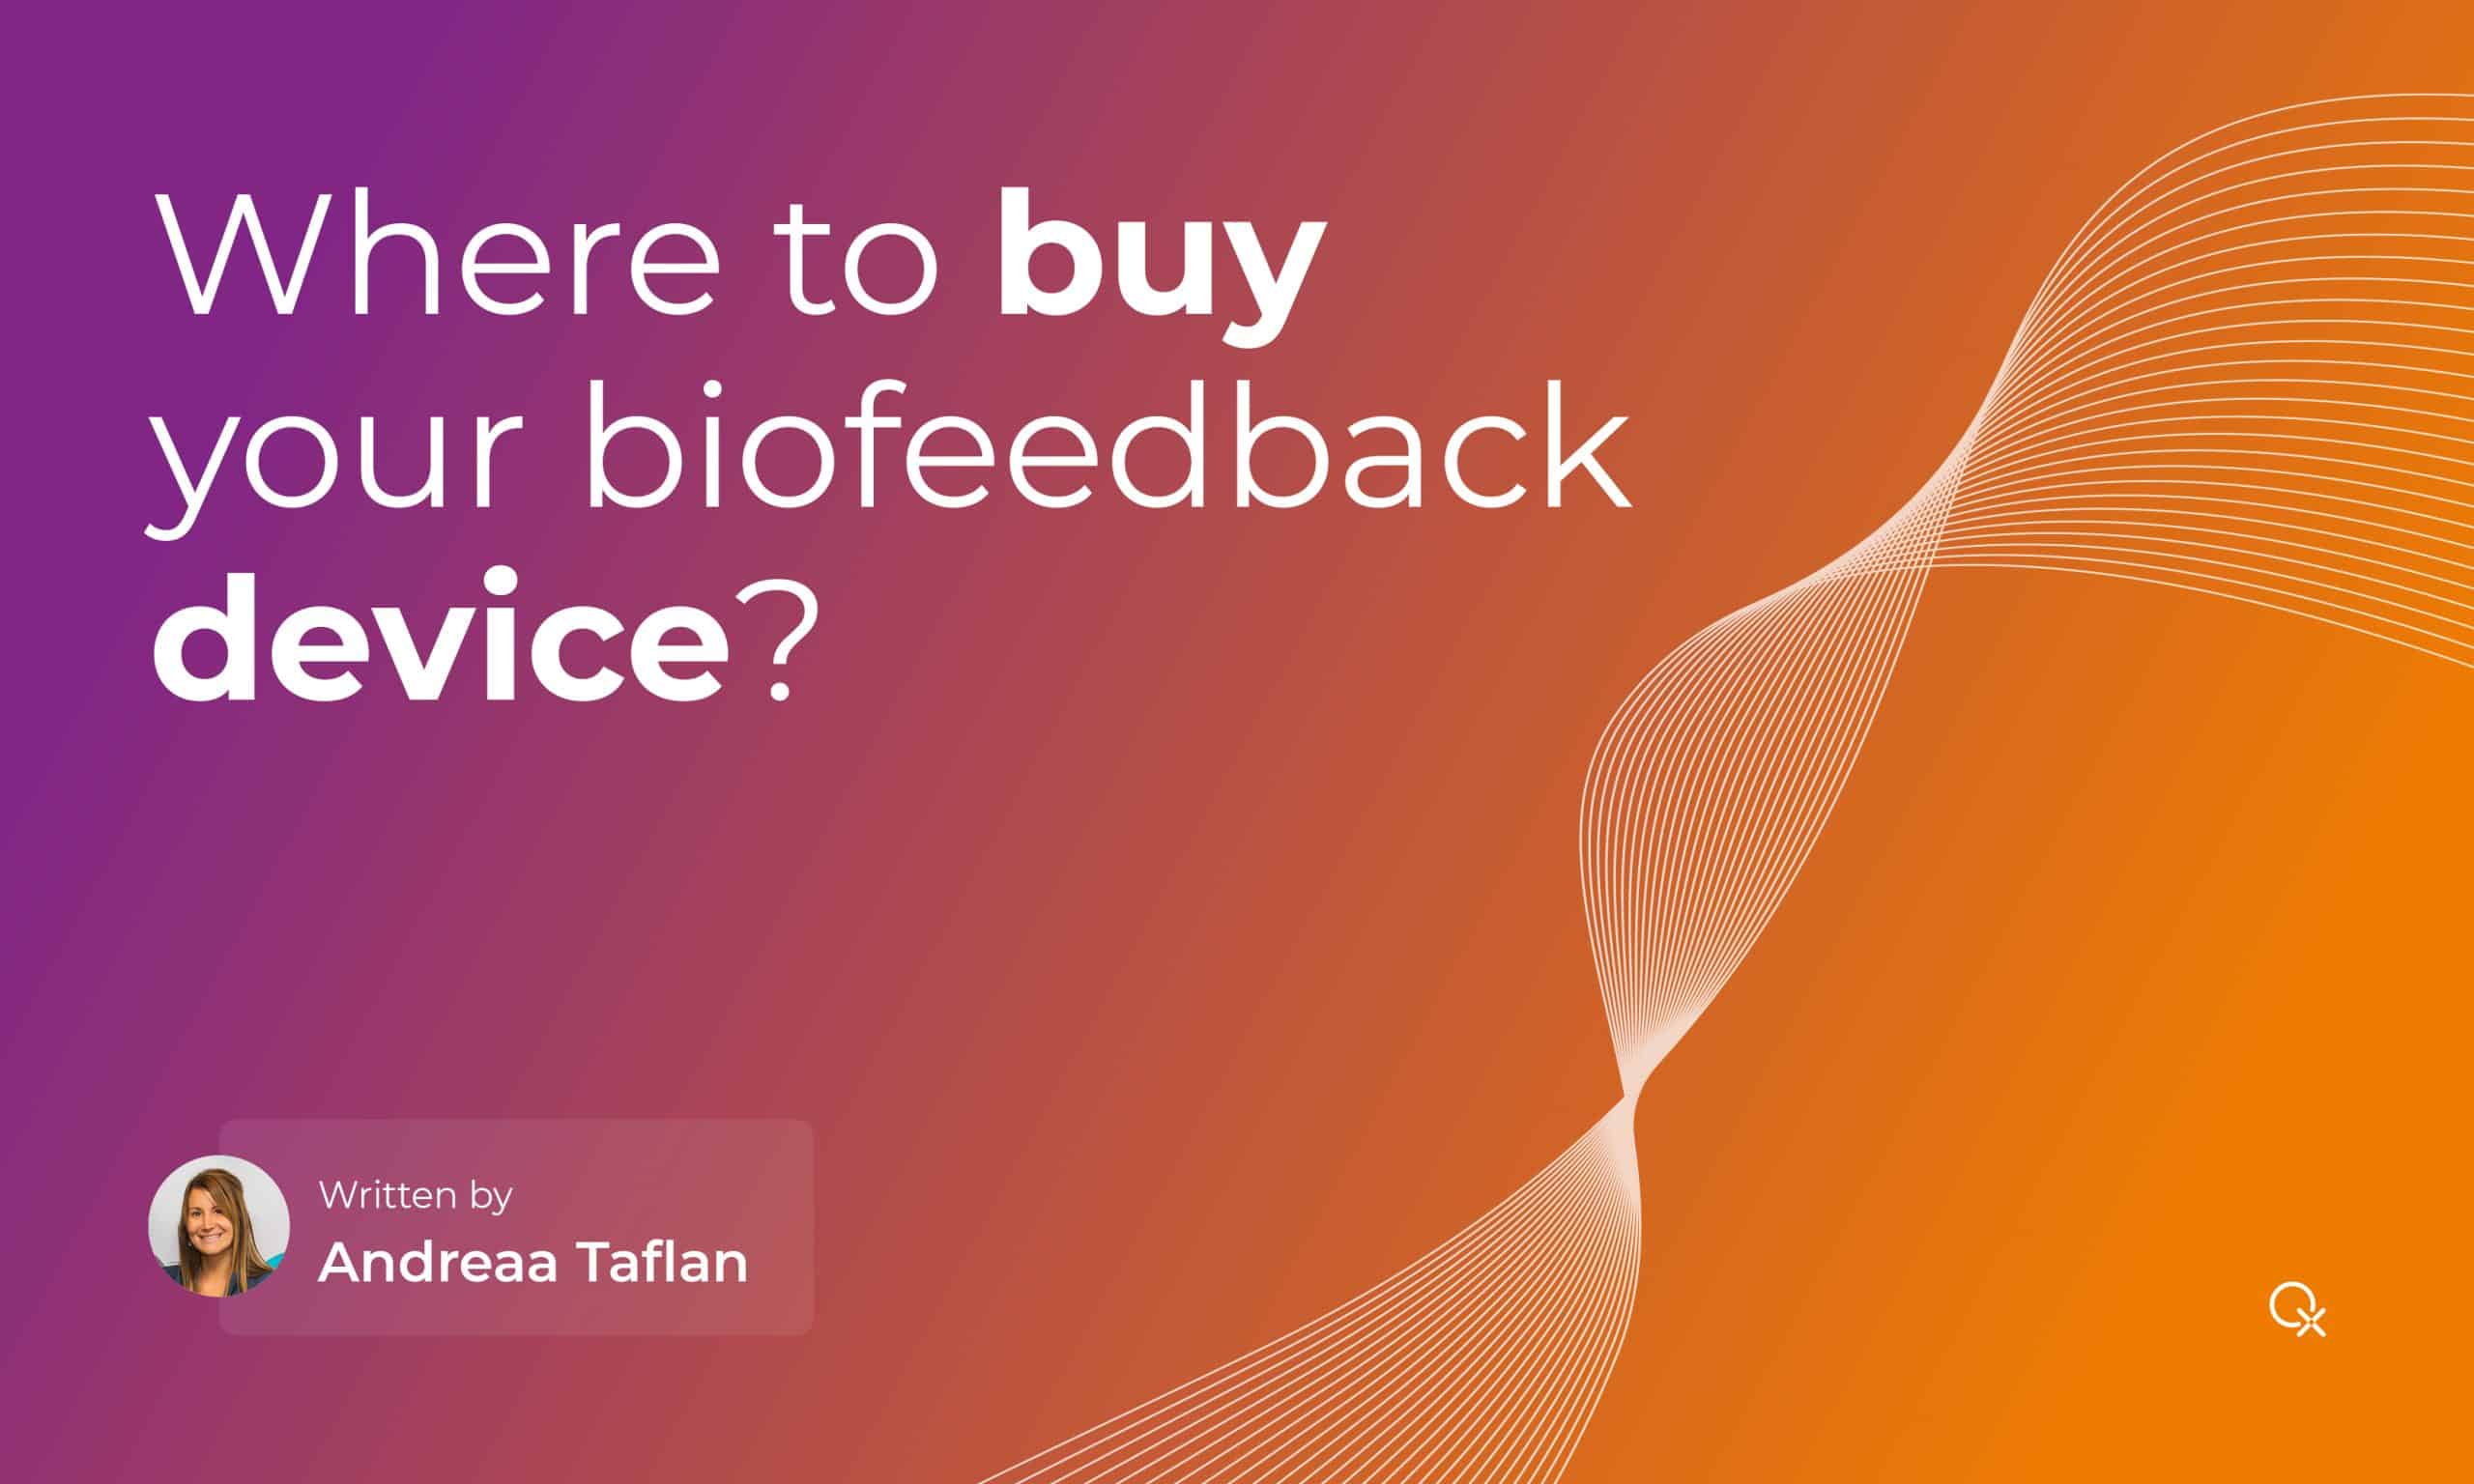 Where to buy your biofeedback device